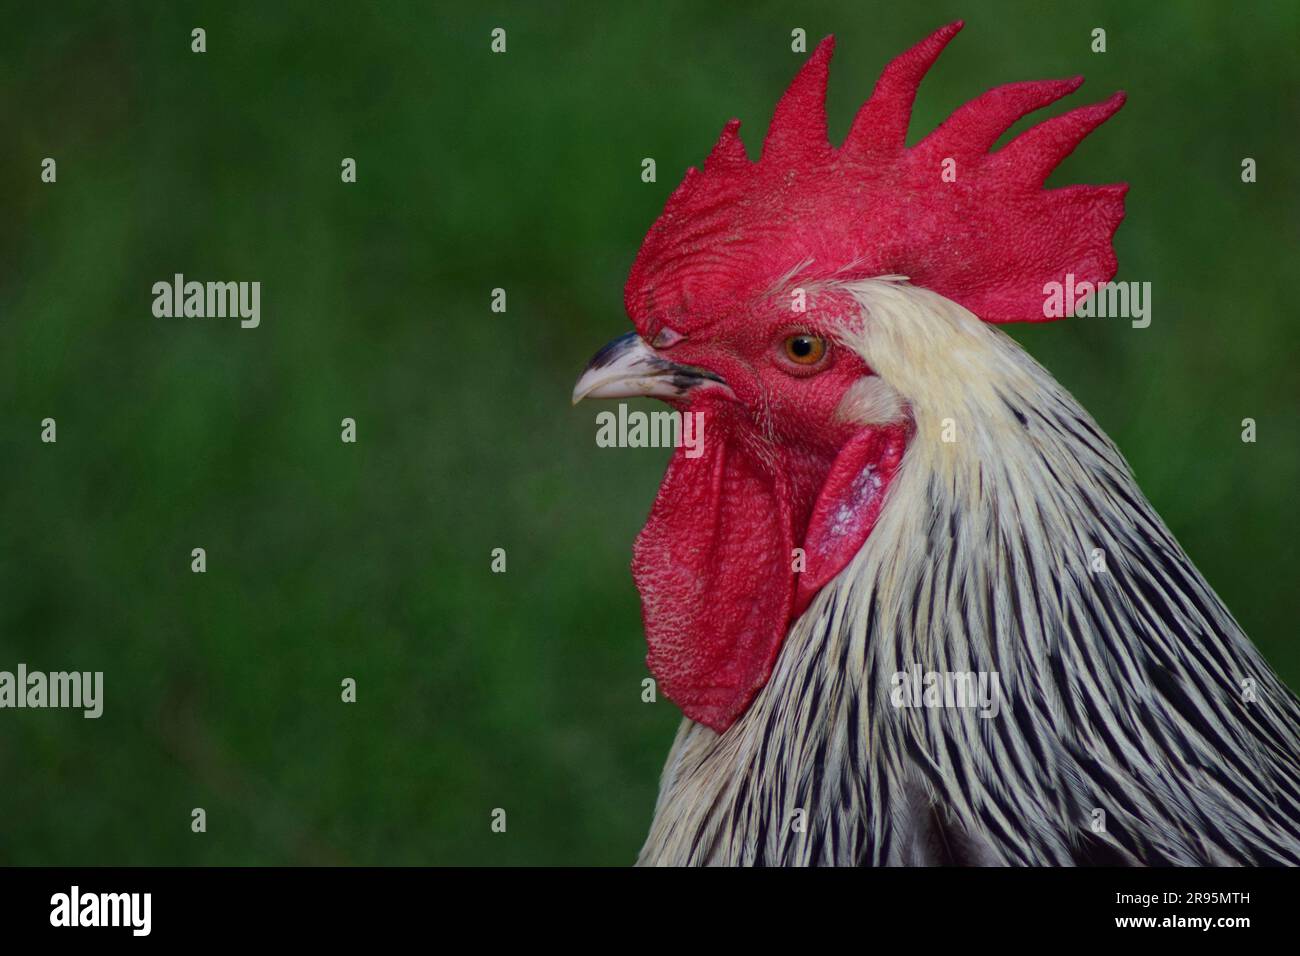 Rooster head close up. Chicken crest or comb. English sussex chicken breed. Stock Photo